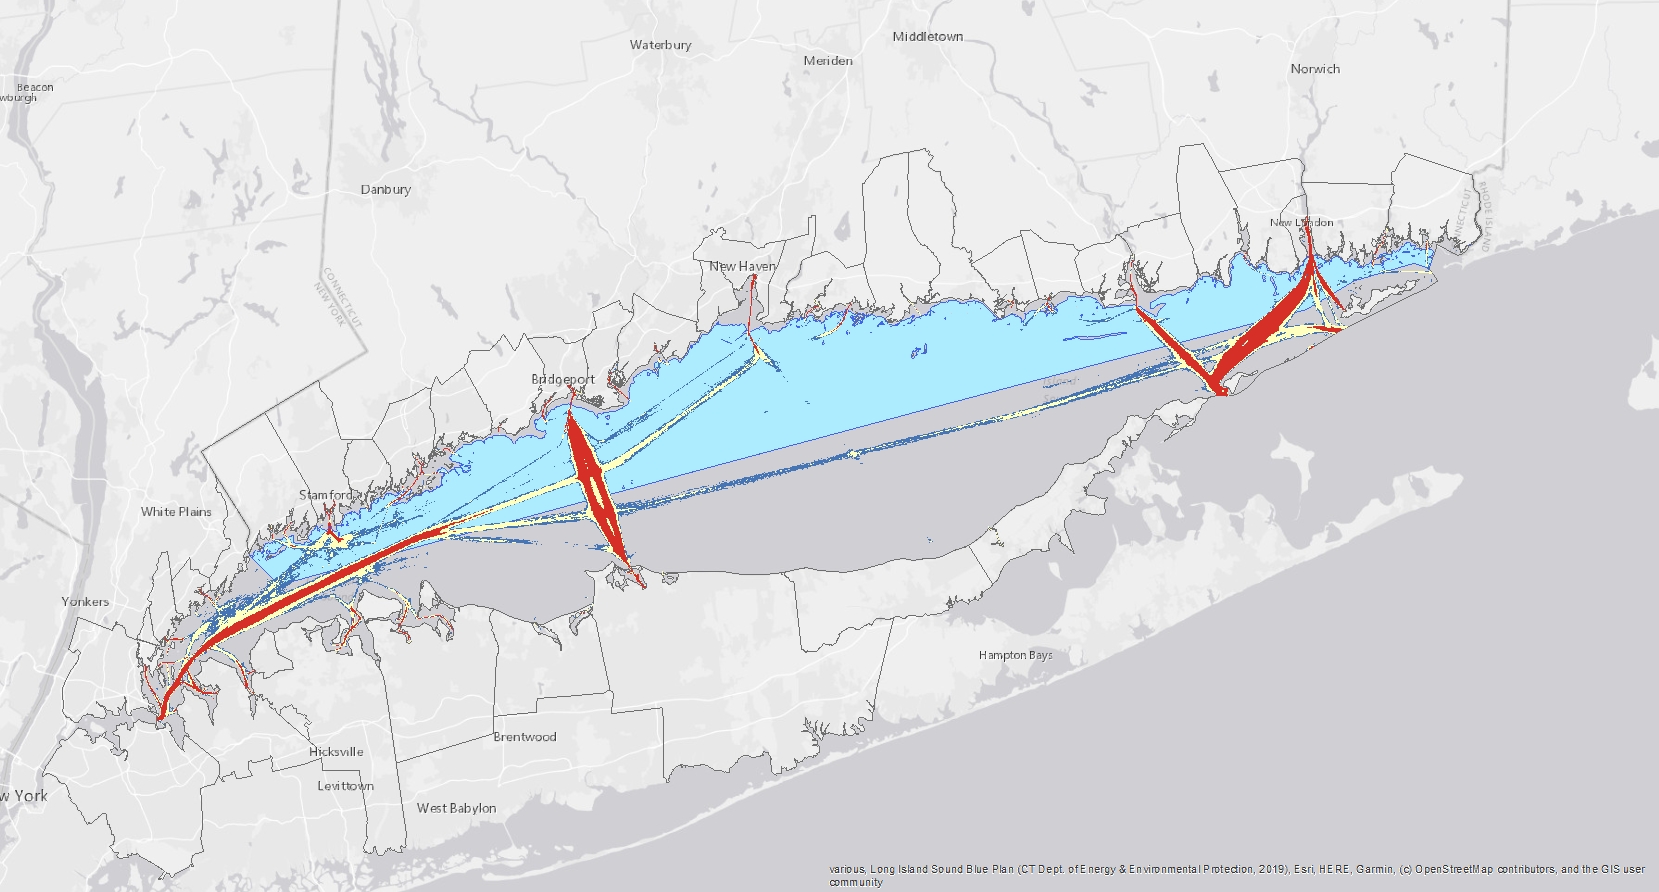 A map showing vessel traffic areas in Long Island Sound.